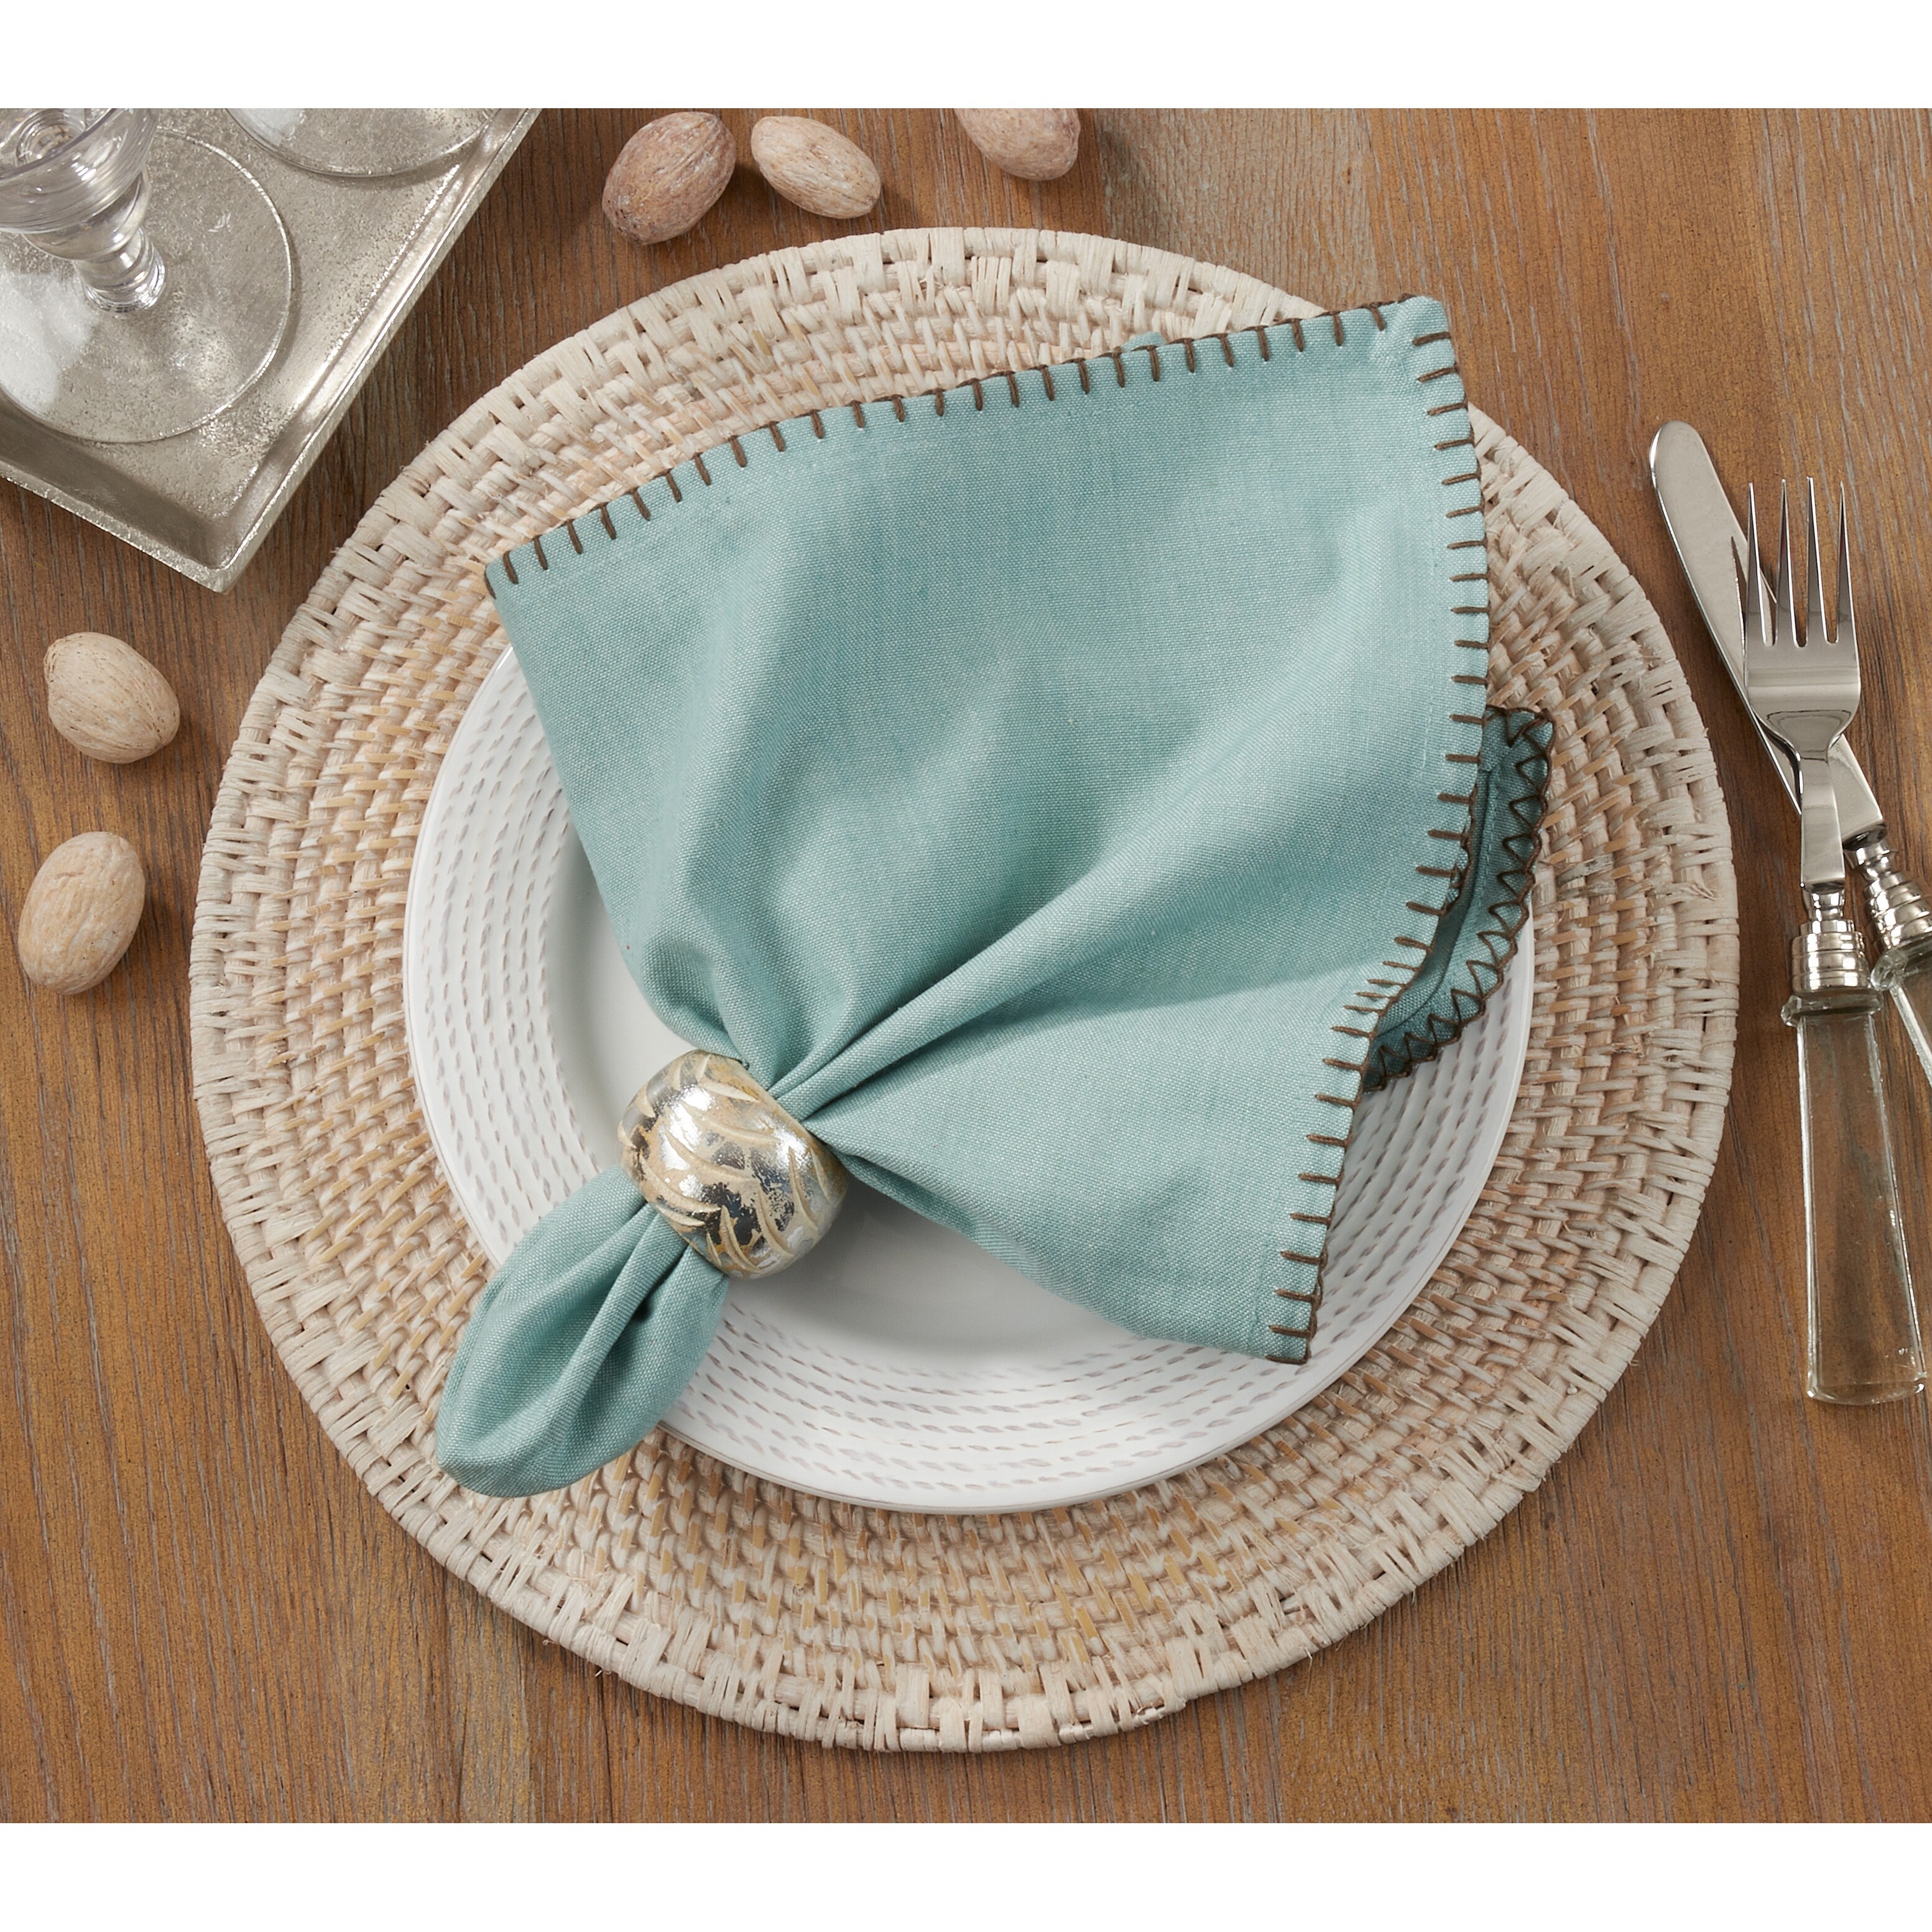 https://ak1.ostkcdn.com/images/products/is/images/direct/63e06382ee49fa2bd2567c6b0e89609a8f54e19f/Whip-Stitched-Design-Napkin-%28Set-of-4%29.jpg